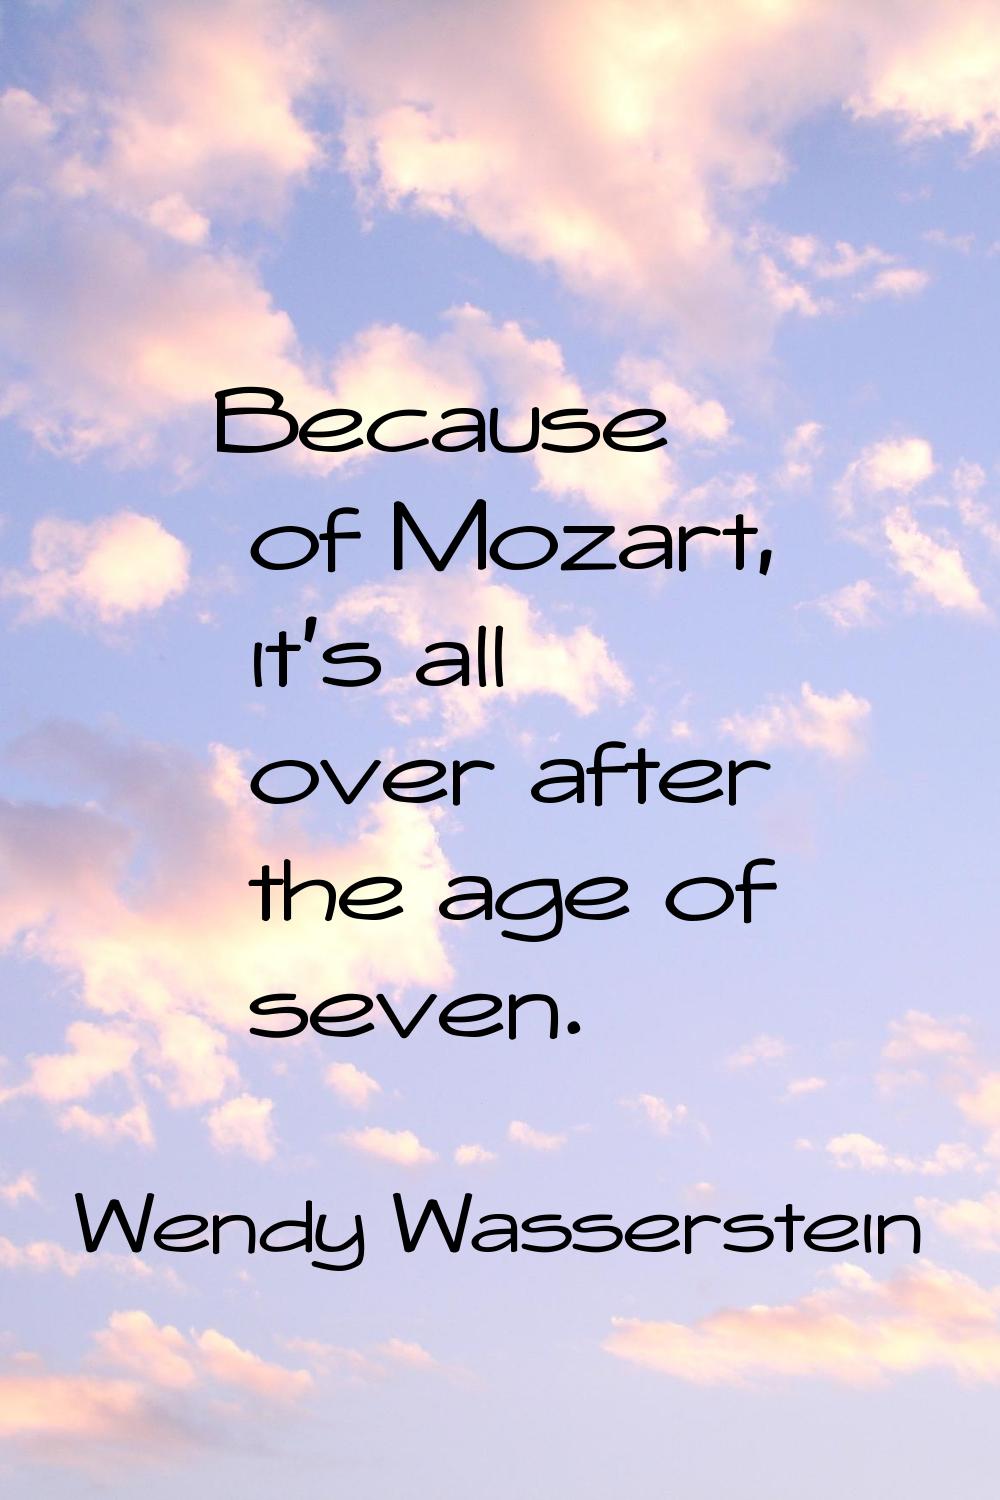 Because of Mozart, it's all over after the age of seven.